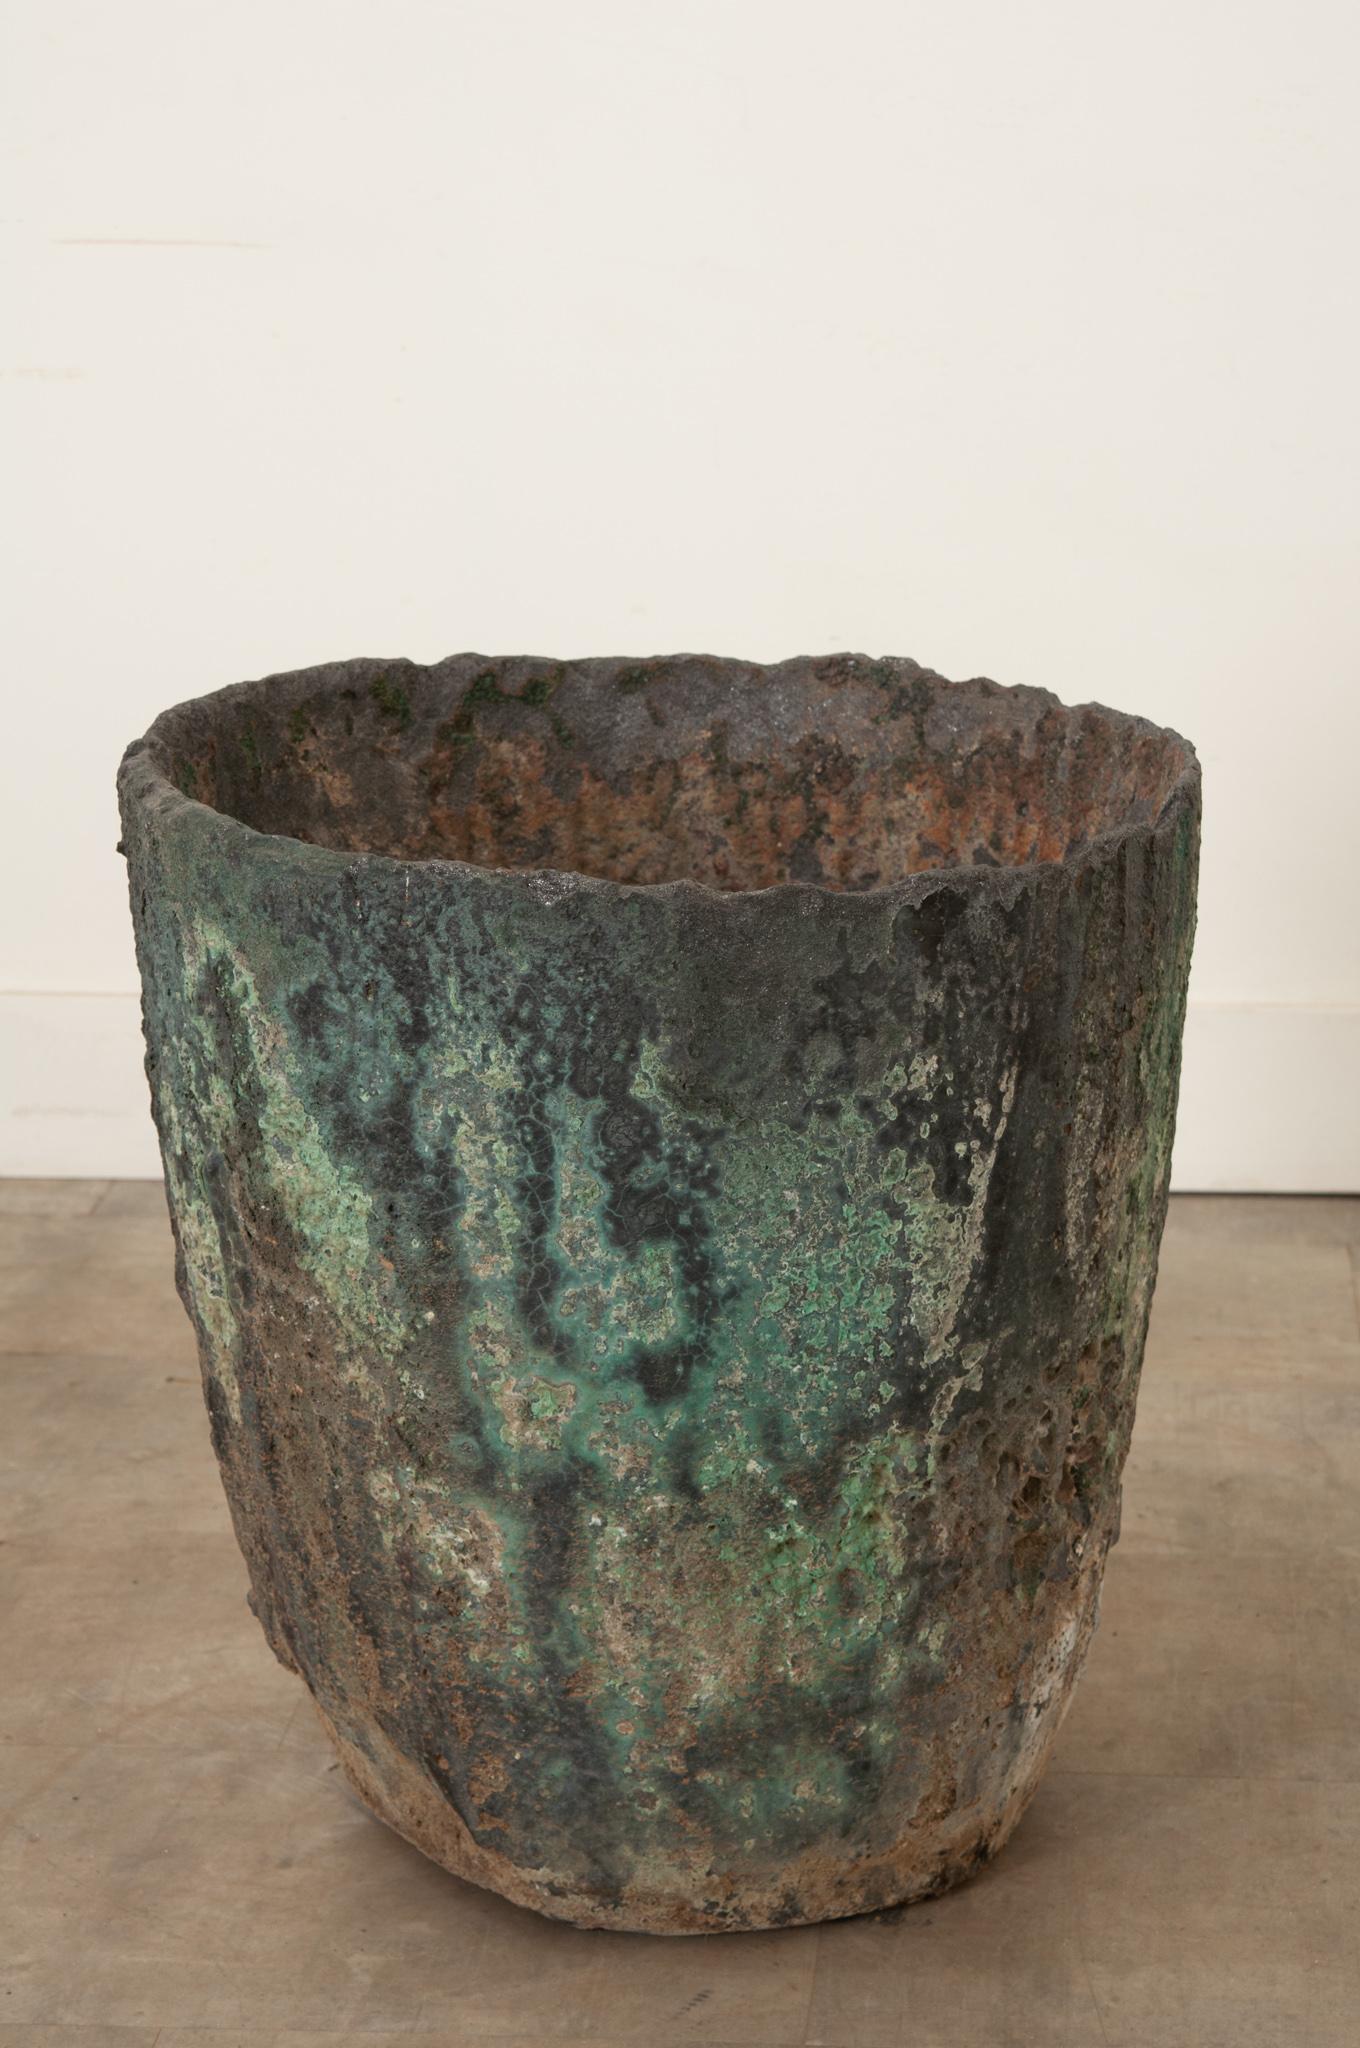 This large antique smelting pot was used for glass blowing and is a great example of Industrial art. It is an object that was made to serve a purpose that has turned into something amazing by Industrial processes and time. Its unique design and